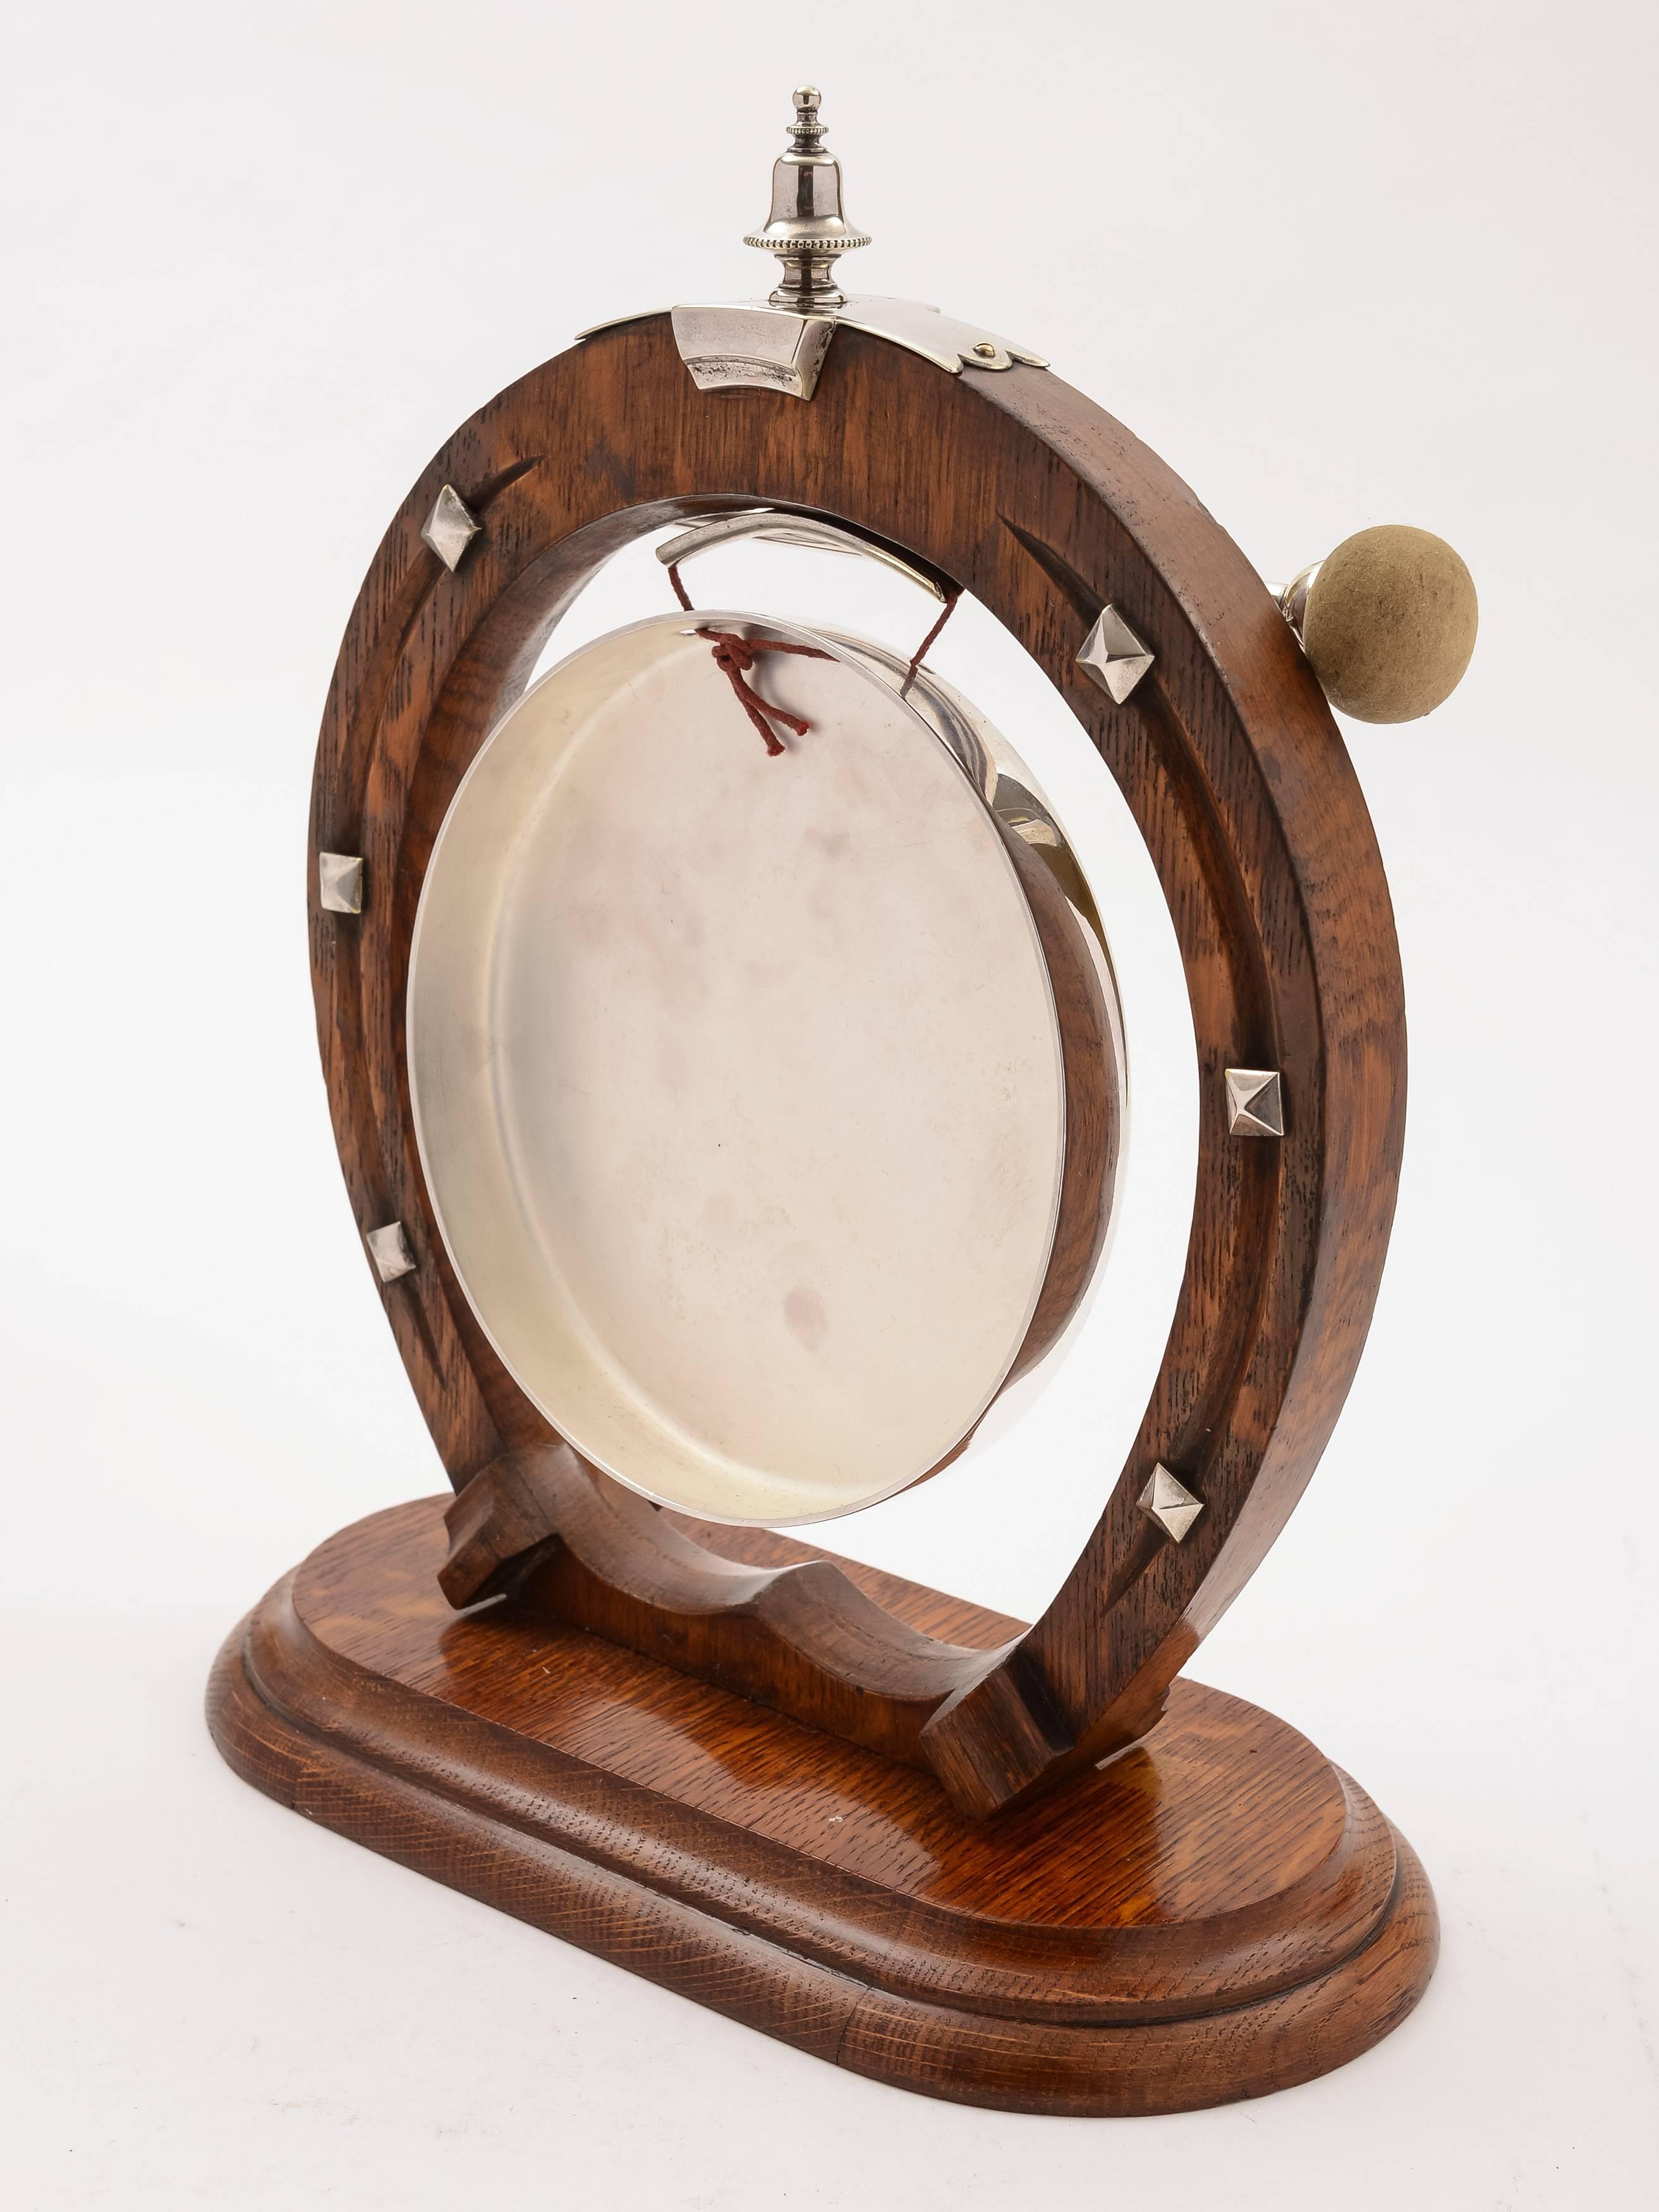 A gorgeous English Victorian large horseshoe shaped oak and silver plated dinner gong with original striker, circa 1890.



Measurements:
Height: 14